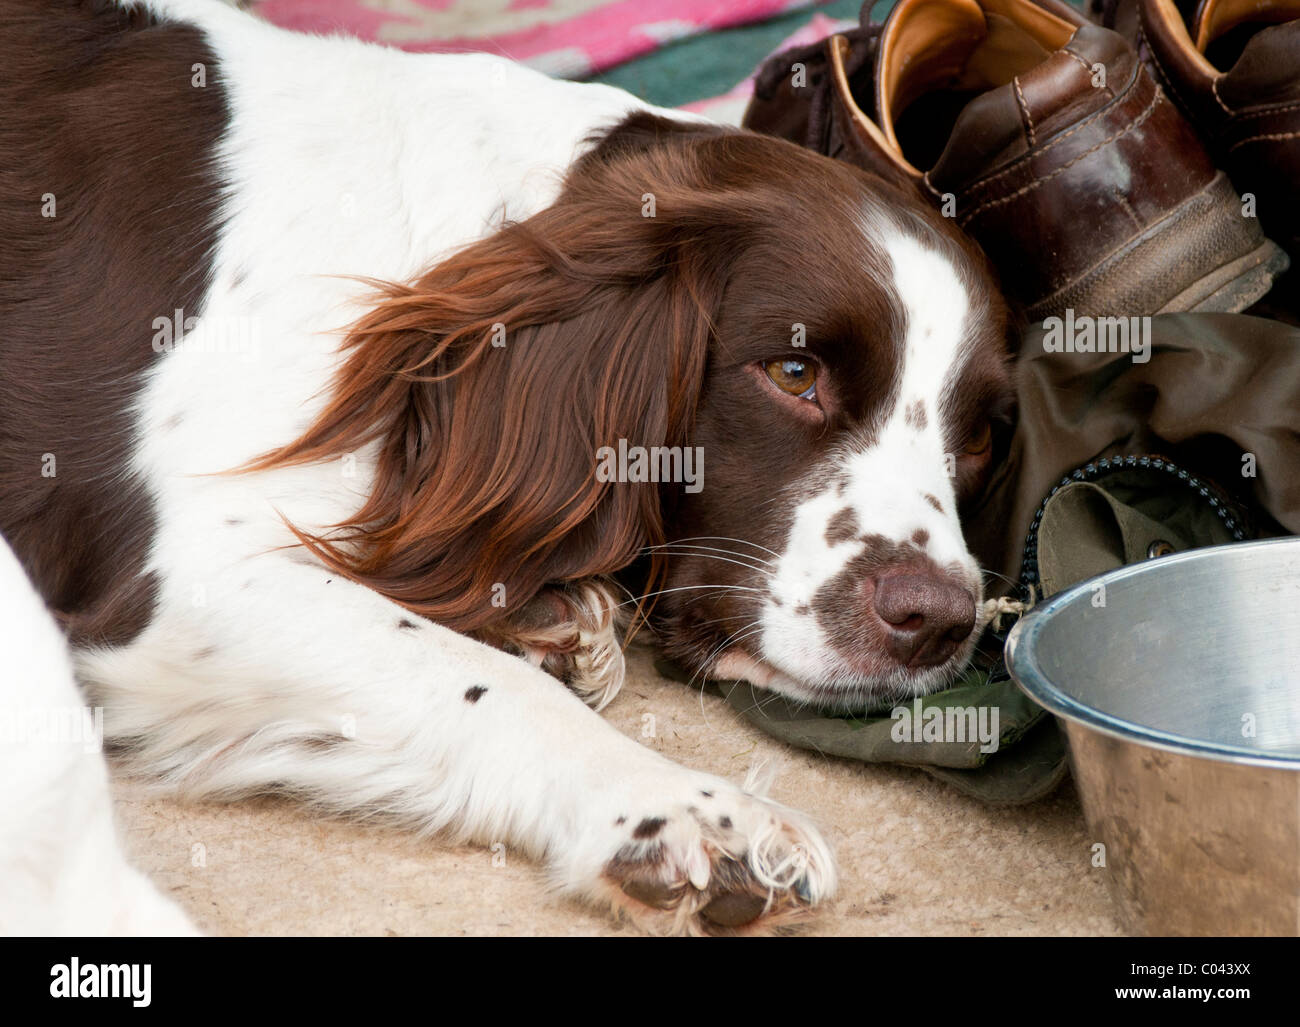 English Springer Spaniel, a working gun dog, resting during a game shoot in a car. Stock Photo